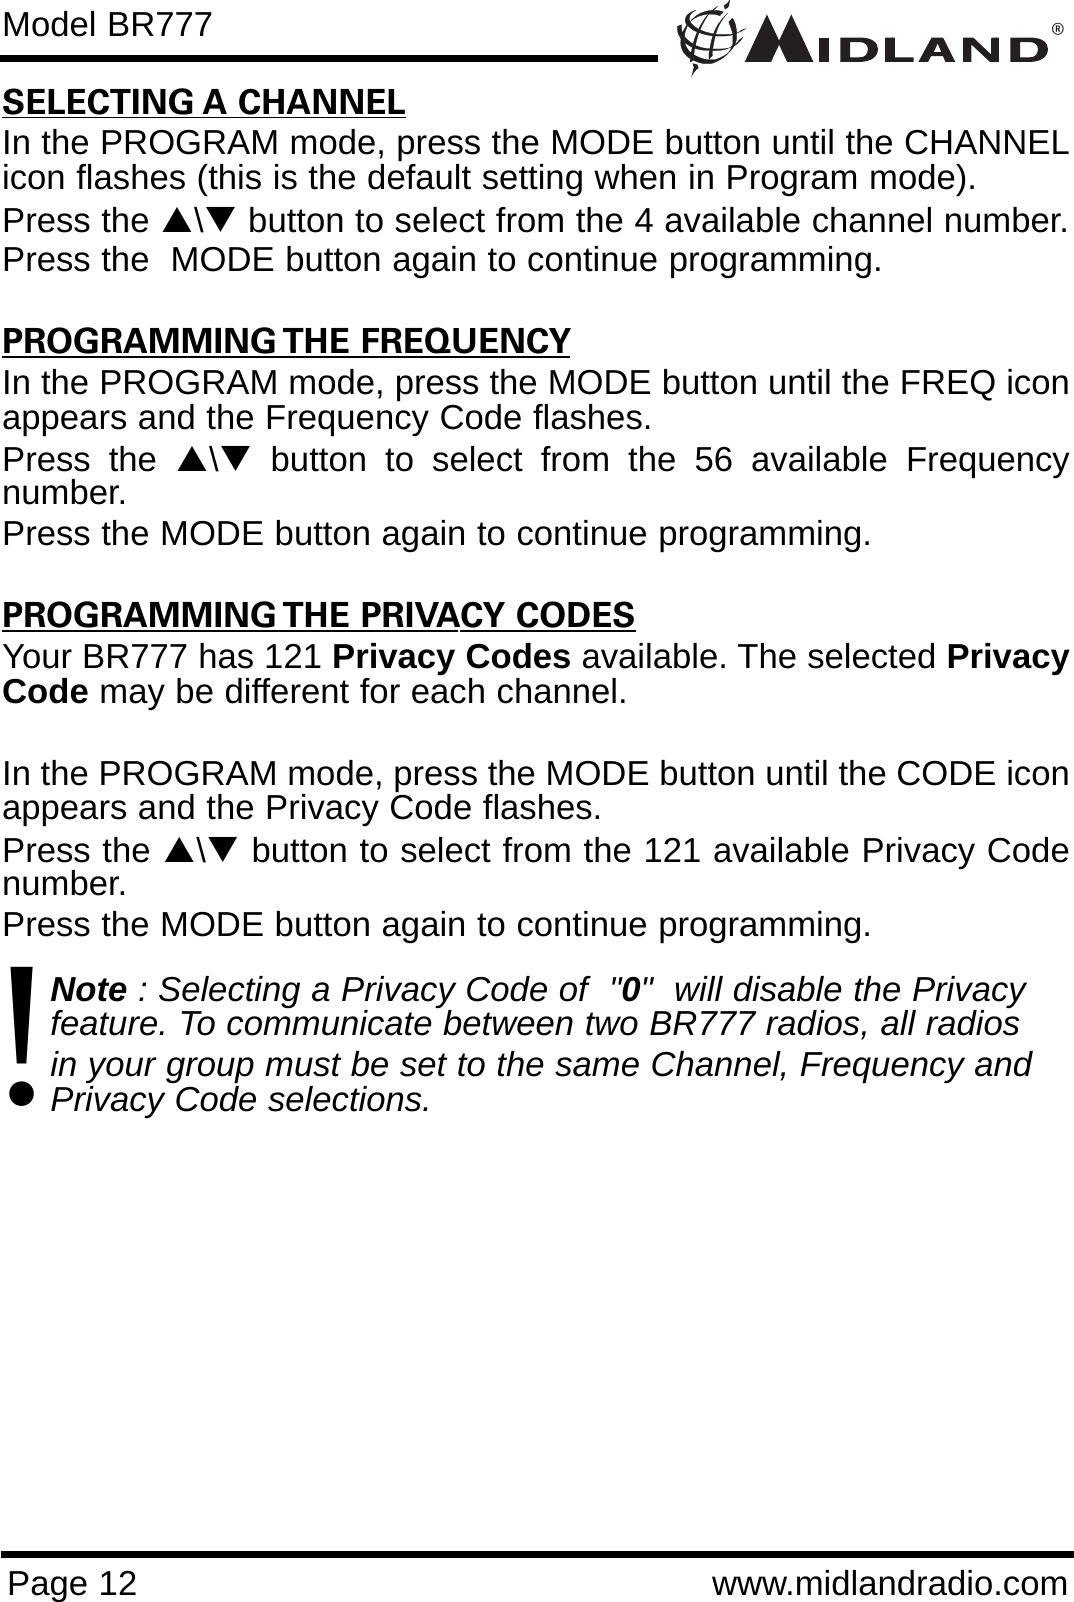 ®Page 12 www.midlandradio.comSELECTING A CHANNELIn the PROGRAM mode, press the MODE button until the CHANNELicon flashes (this is the default setting when in Program mode).Press the S\Tbutton to select from the 4 available channel number.Press the  MODE button again to continue programming.                    PROGRAMMING THE FREQUENCYIn the PROGRAM mode, press the MODE button until the FREQ iconappears and the Frequency Code flashes.Press the S\Tbutton to select from the 56 available Frequencynumber.Press the MODE button again to continue programming.PROGRAMMING THE PRIVACY CODESYour BR777 has 121 Privacy Codes available. The selected PrivacyCode may be different for each channel. In the PROGRAM mode, press the MODE button until the CODE iconappears and the Privacy Code flashes.Press the S\Tbutton to select from the 121 available Privacy Codenumber.Press the MODE button again to continue programming.Note : Selecting a Privacy Code of  &quot;0&quot;  will disable the Privacy feature. To communicate between two BR777 radios, all radios in your group must be set to the same Channel, Frequency and Privacy Code selections.Model BR777!